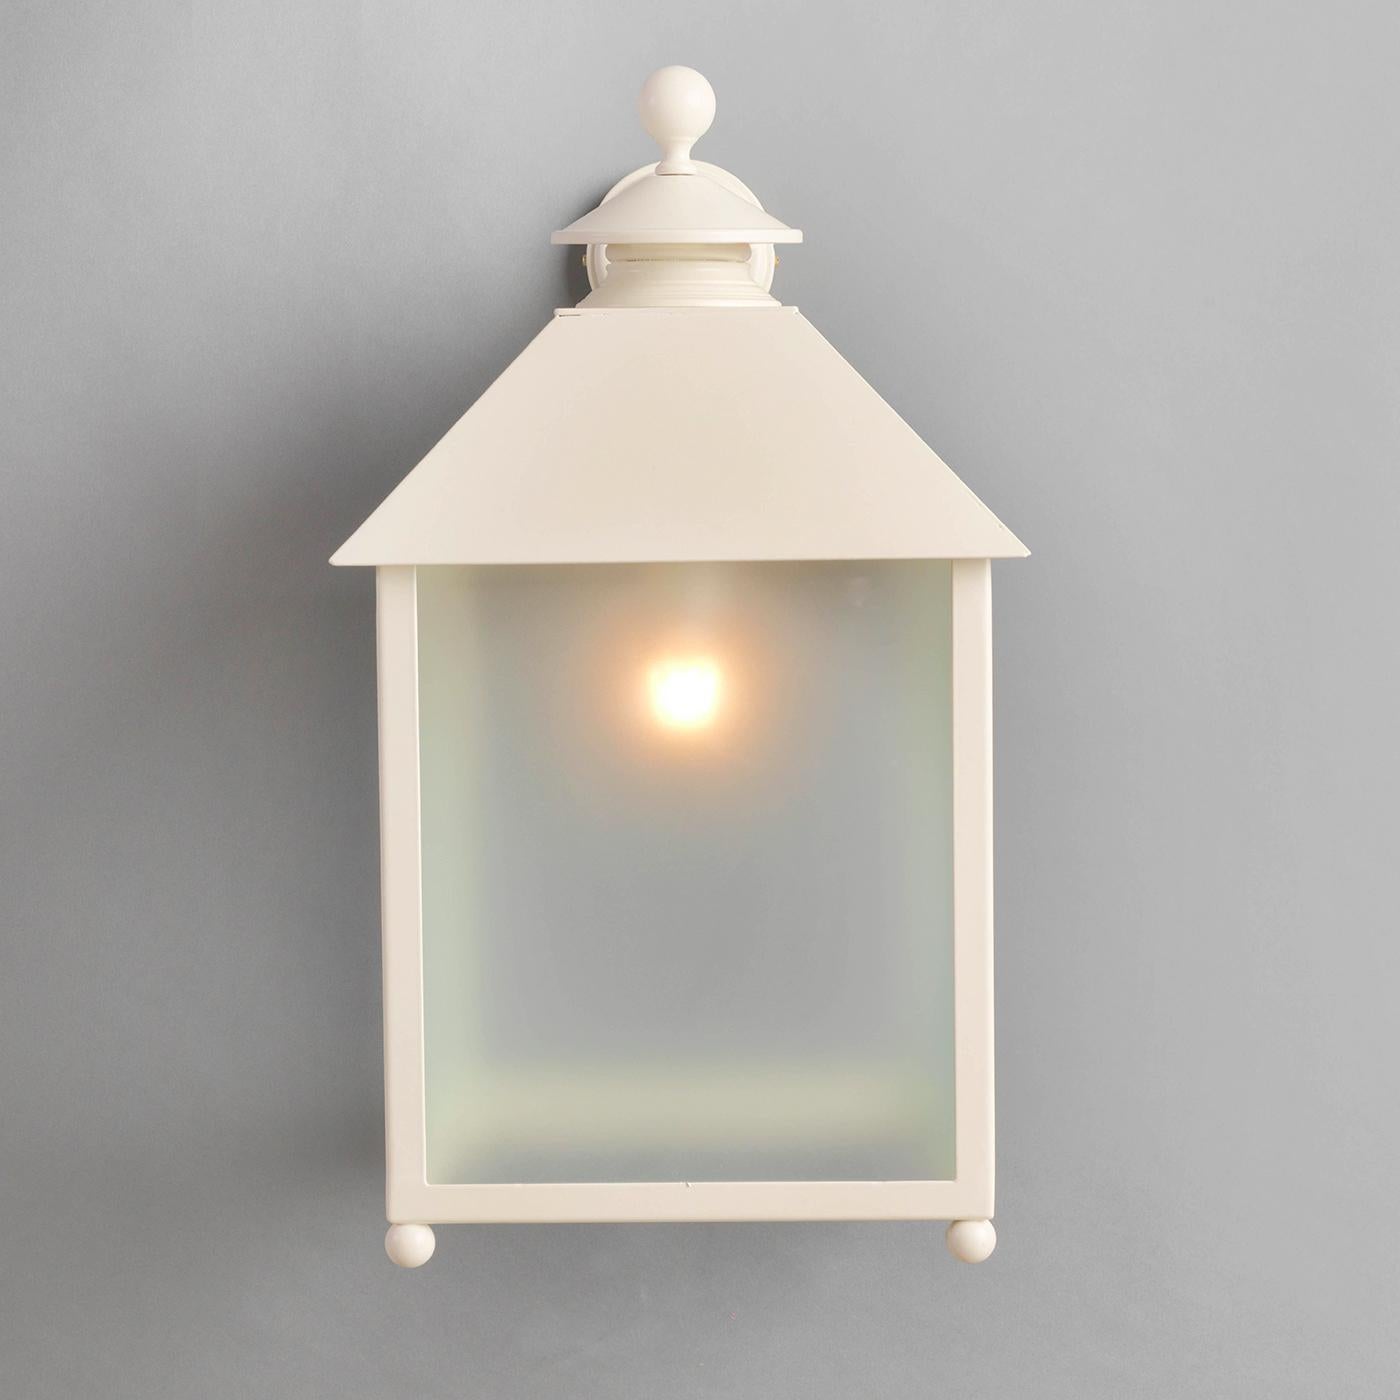 This wall lantern is a charming addition to both classic and modern homes. Its Minimalist silhouette is made of stainless steel treated with a cream-colored zinc and powder-based varnish to make it suitable for outdoor use. Attached to an external